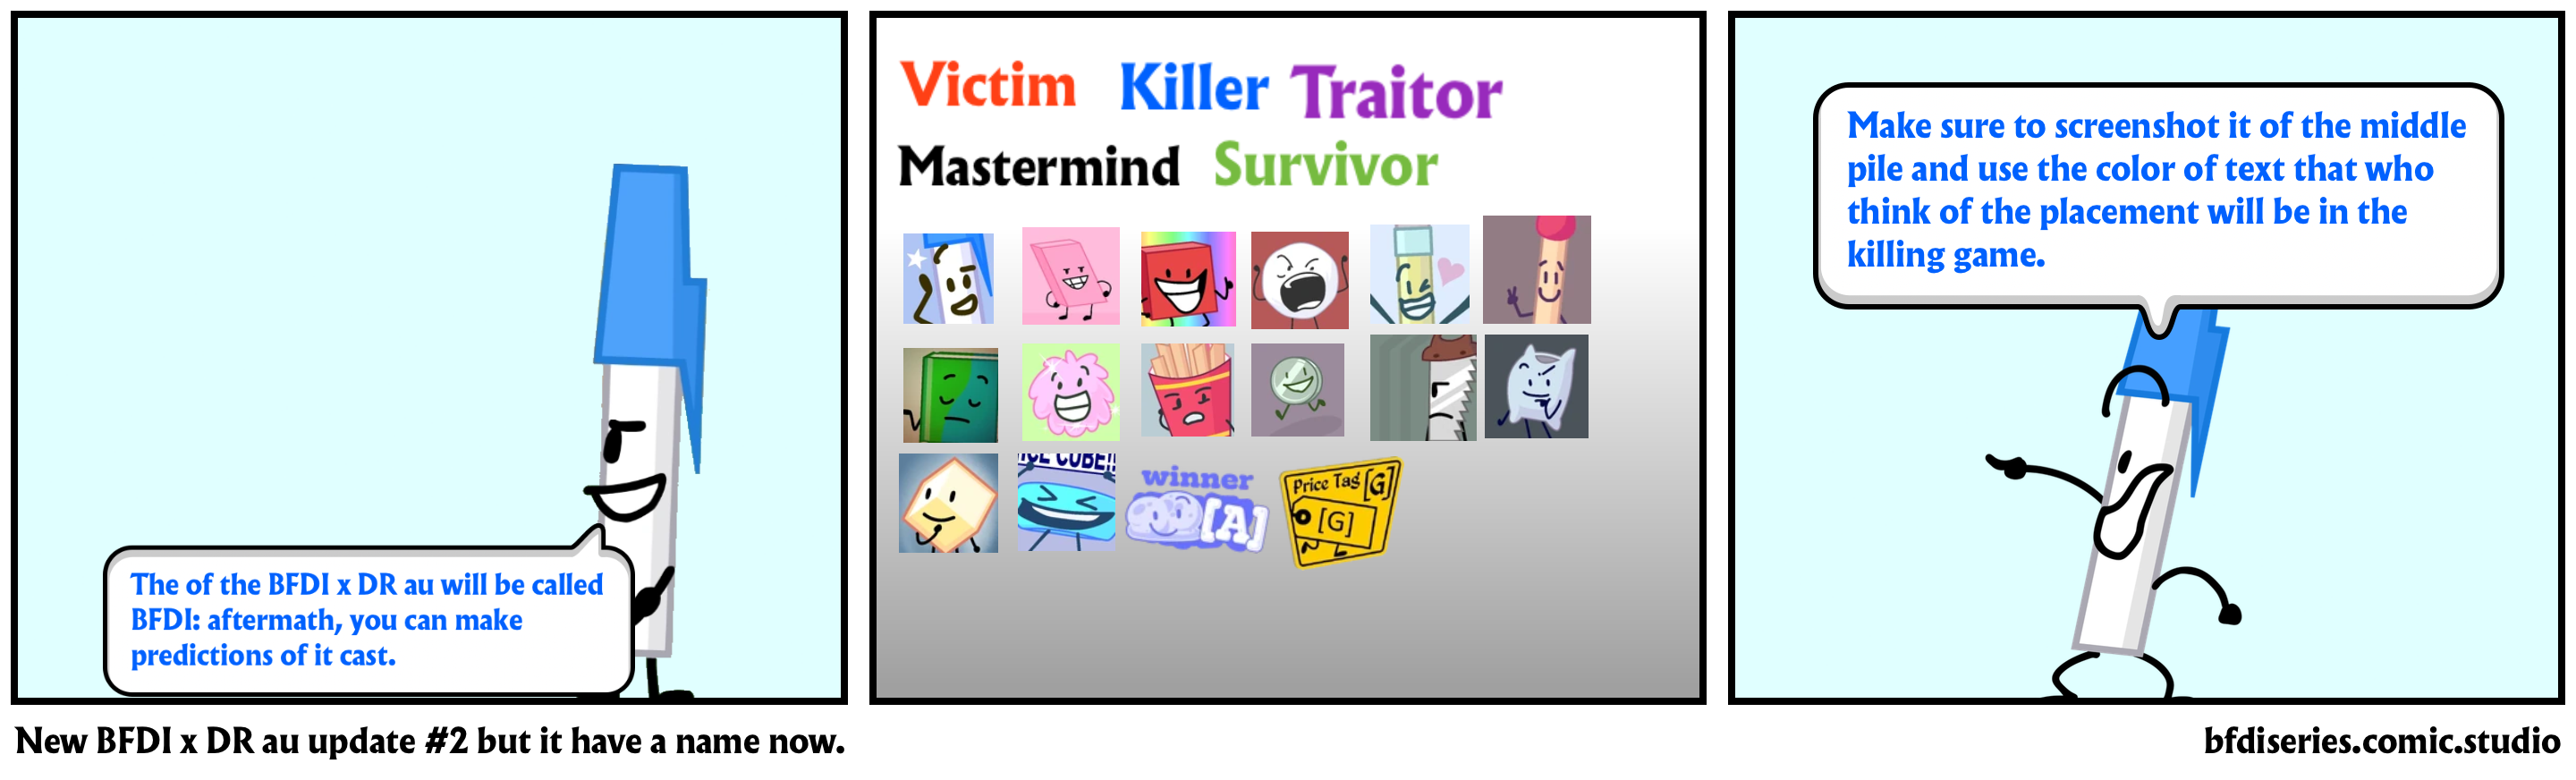 New BFDI x DR au update #2 but it have a name now.